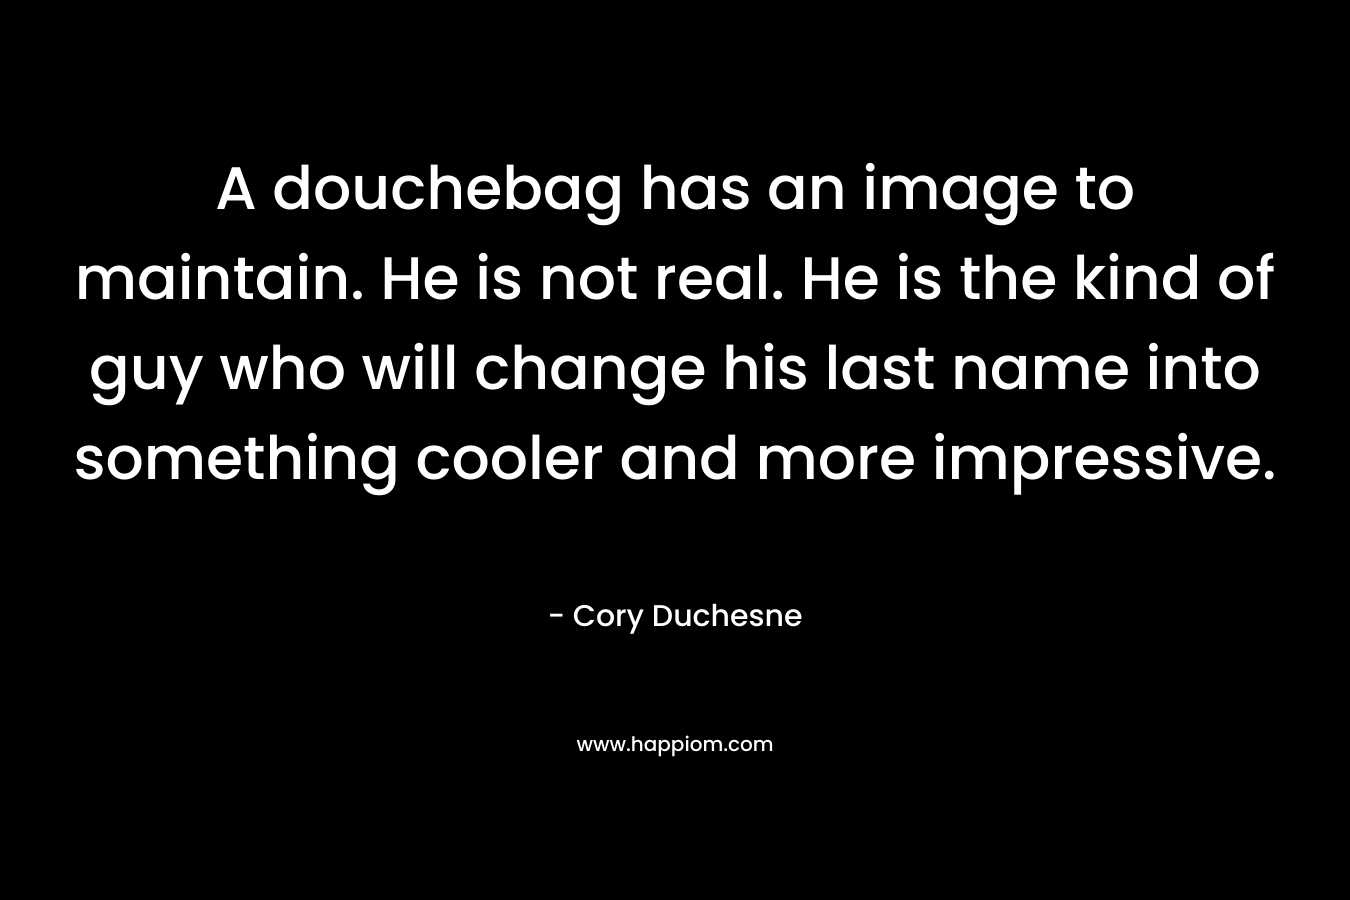 A douchebag has an image to maintain. He is not real. He is the kind of guy who will change his last name into something cooler and more impressive. – Cory Duchesne